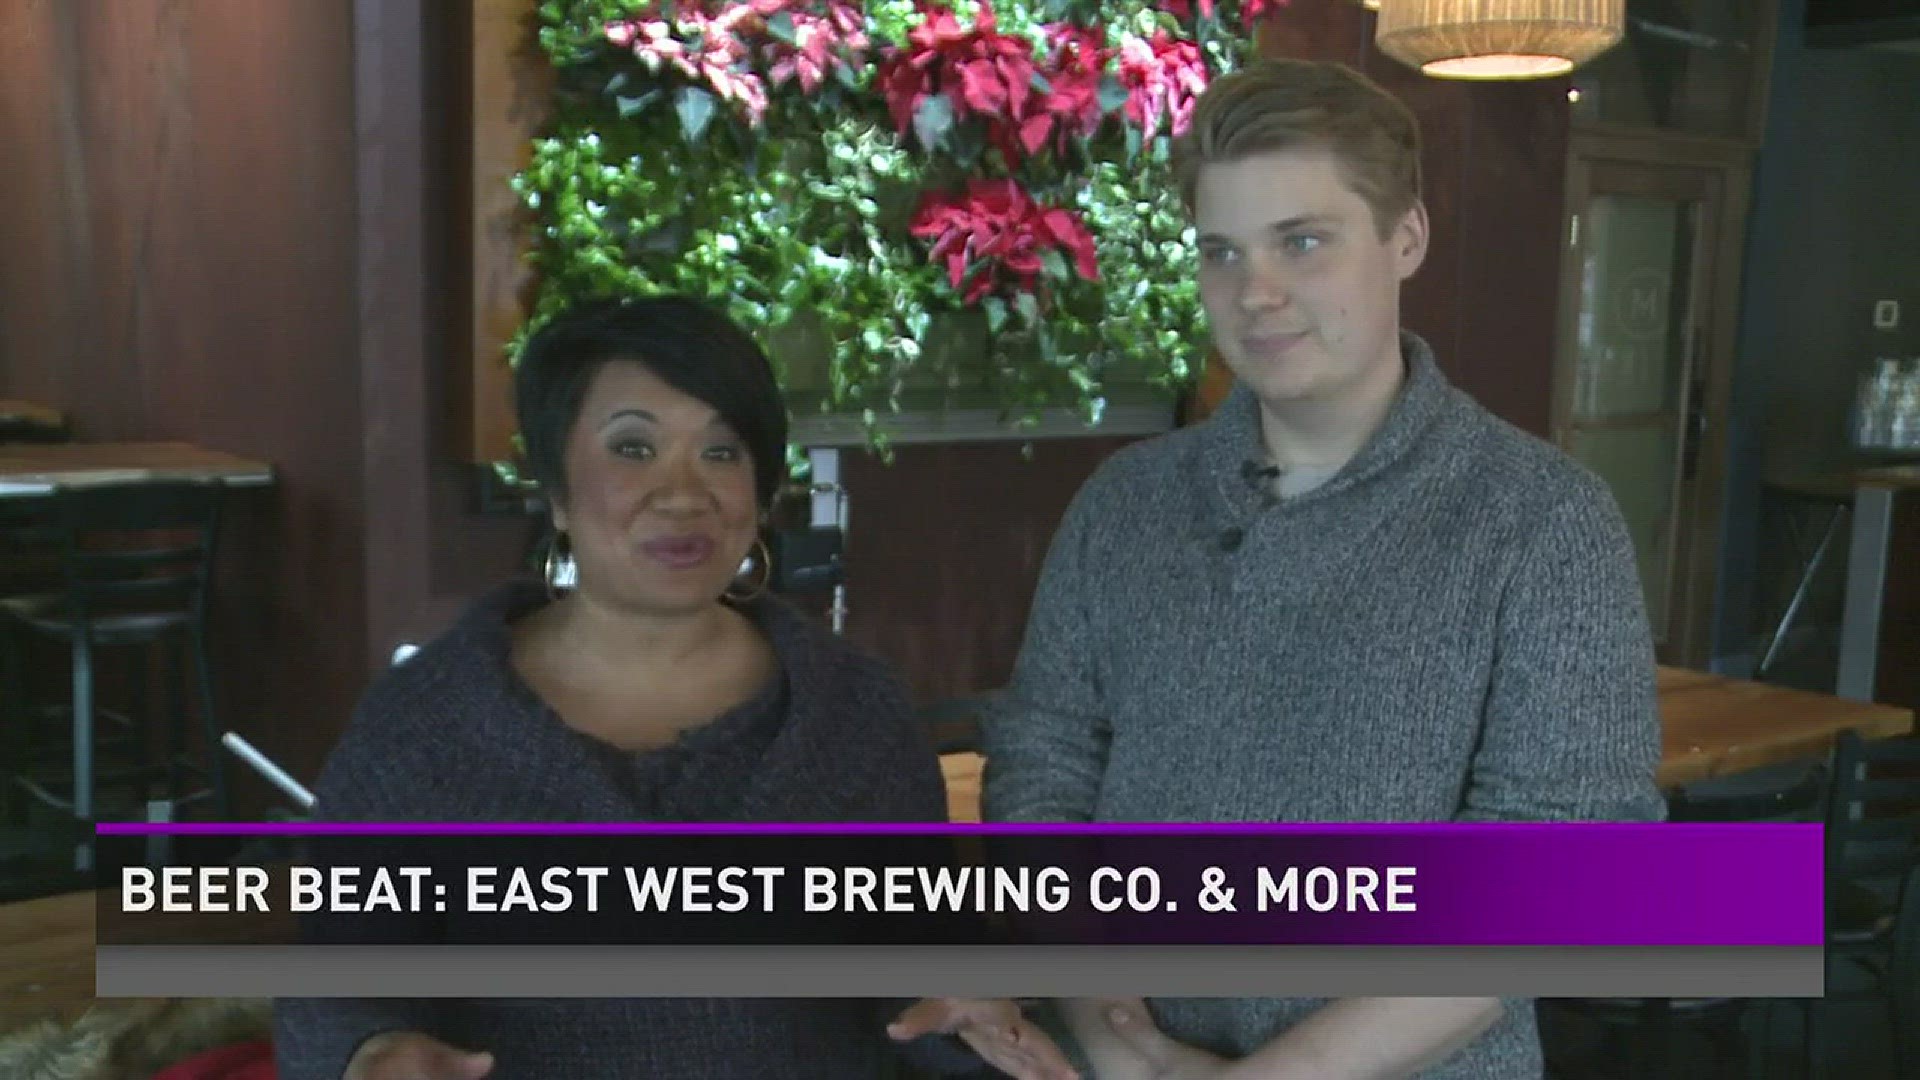 Beer Beat: East West Brewing Co. & More